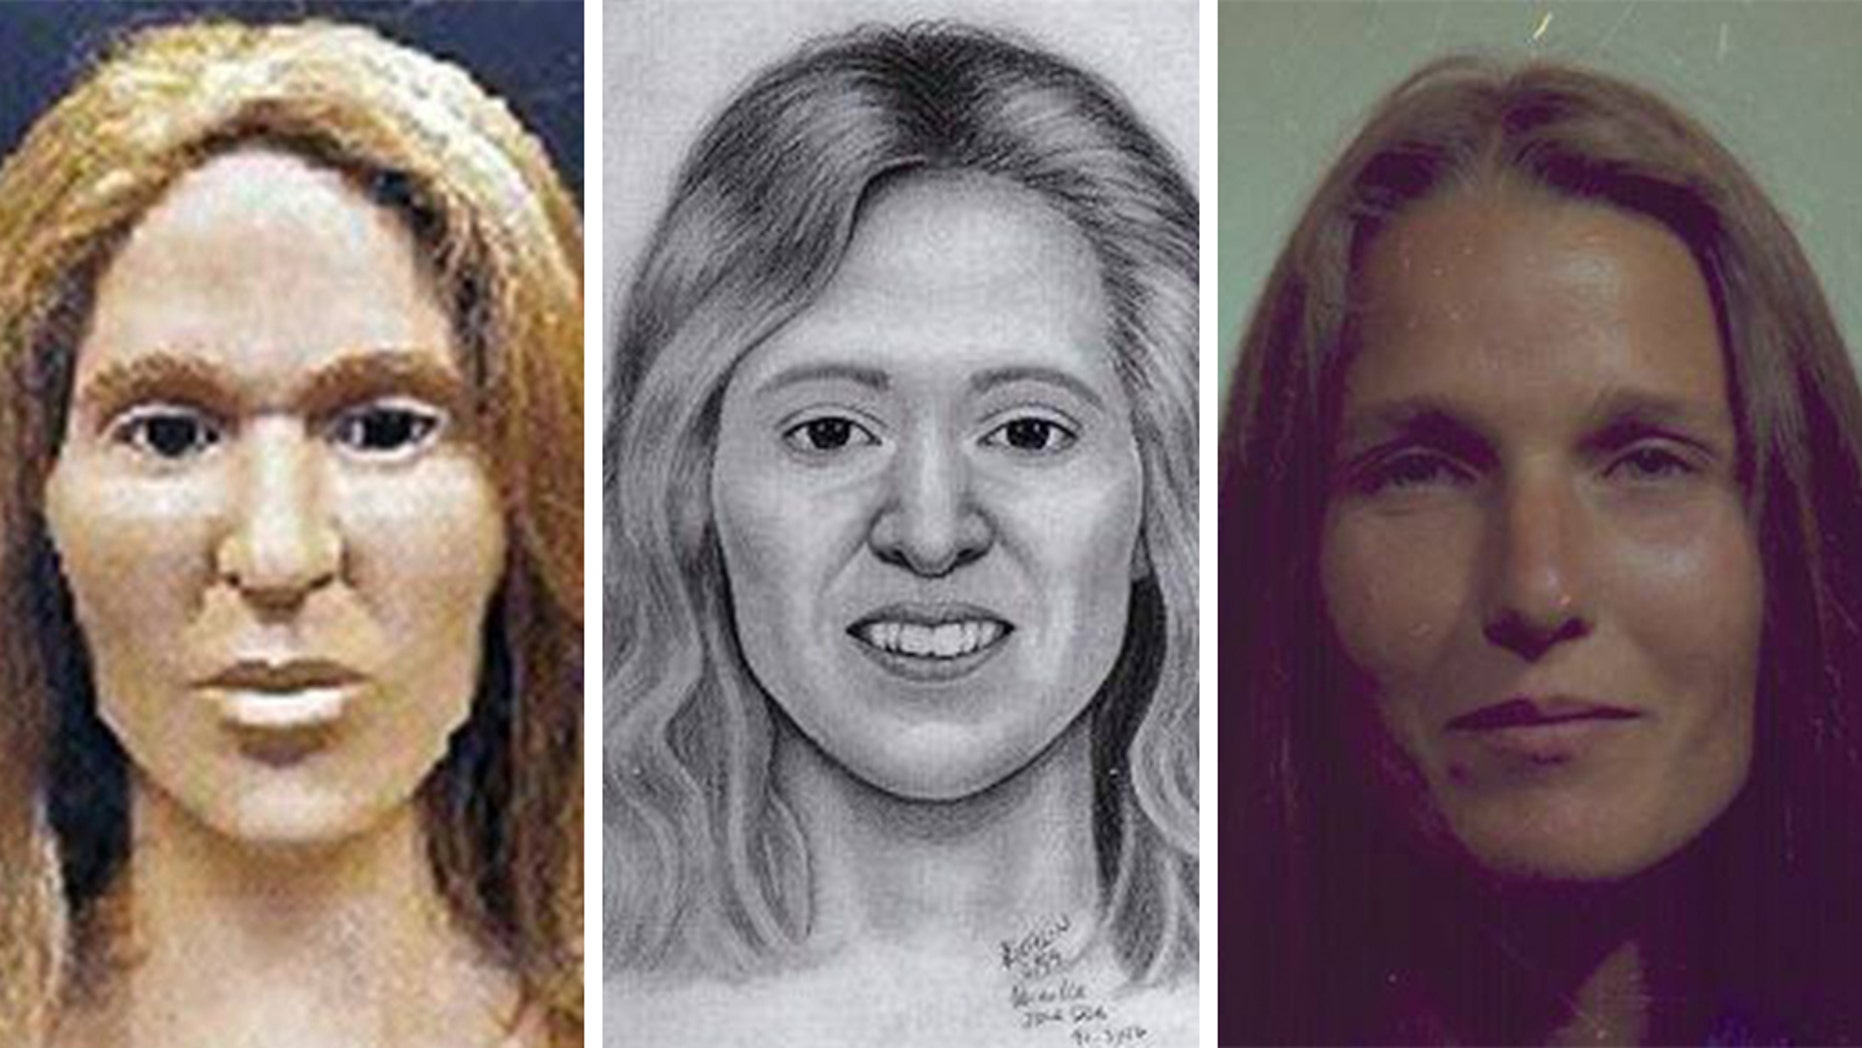 After 28 years, detectives have never lost hope that a "Jane Doe" case would be resolved someday. From the clay reconstruction model (left) to the artist's sketch made after the completion of the model, the woman was identified as Cynthia Merkley, 